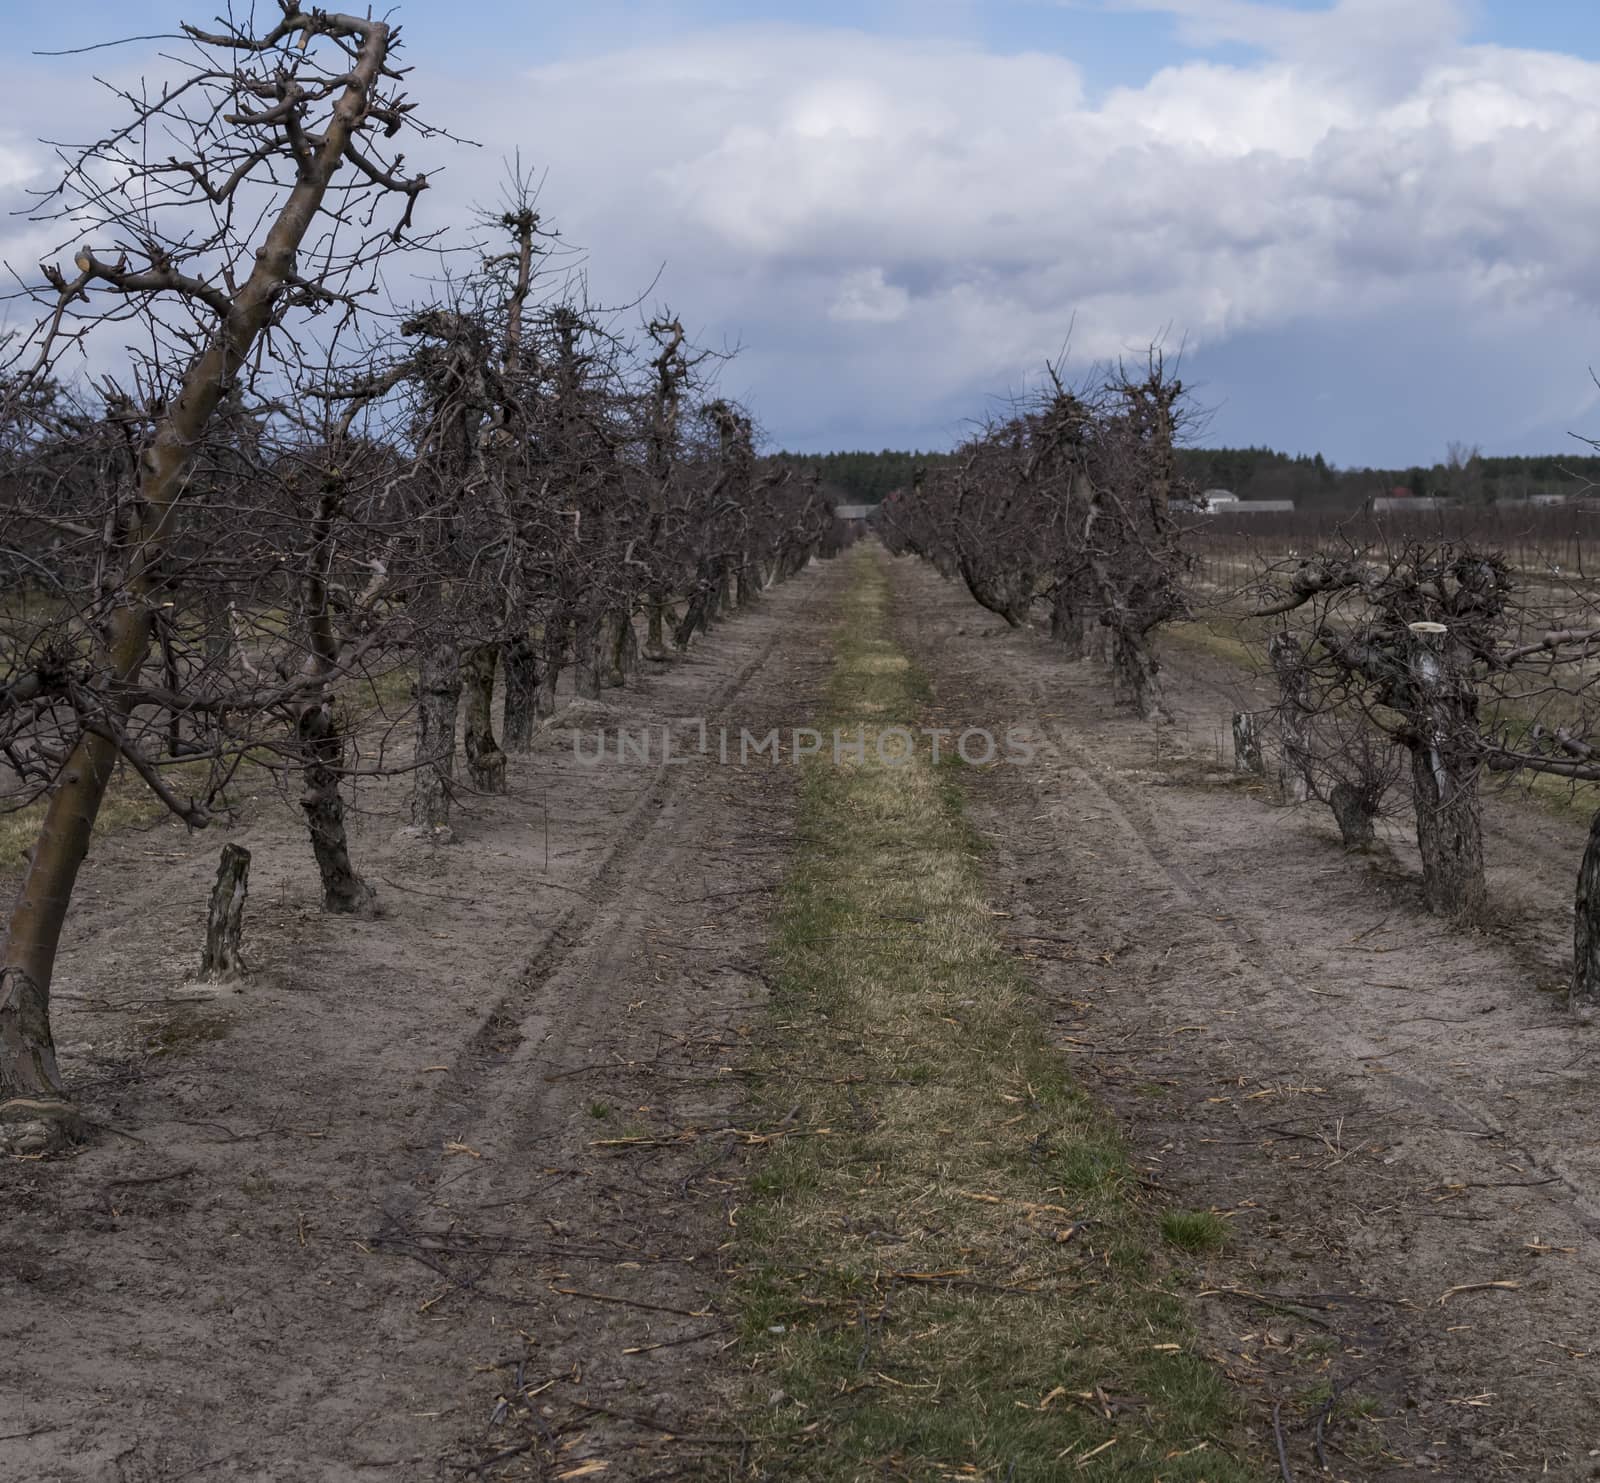 apple orchard after winter season by michal812